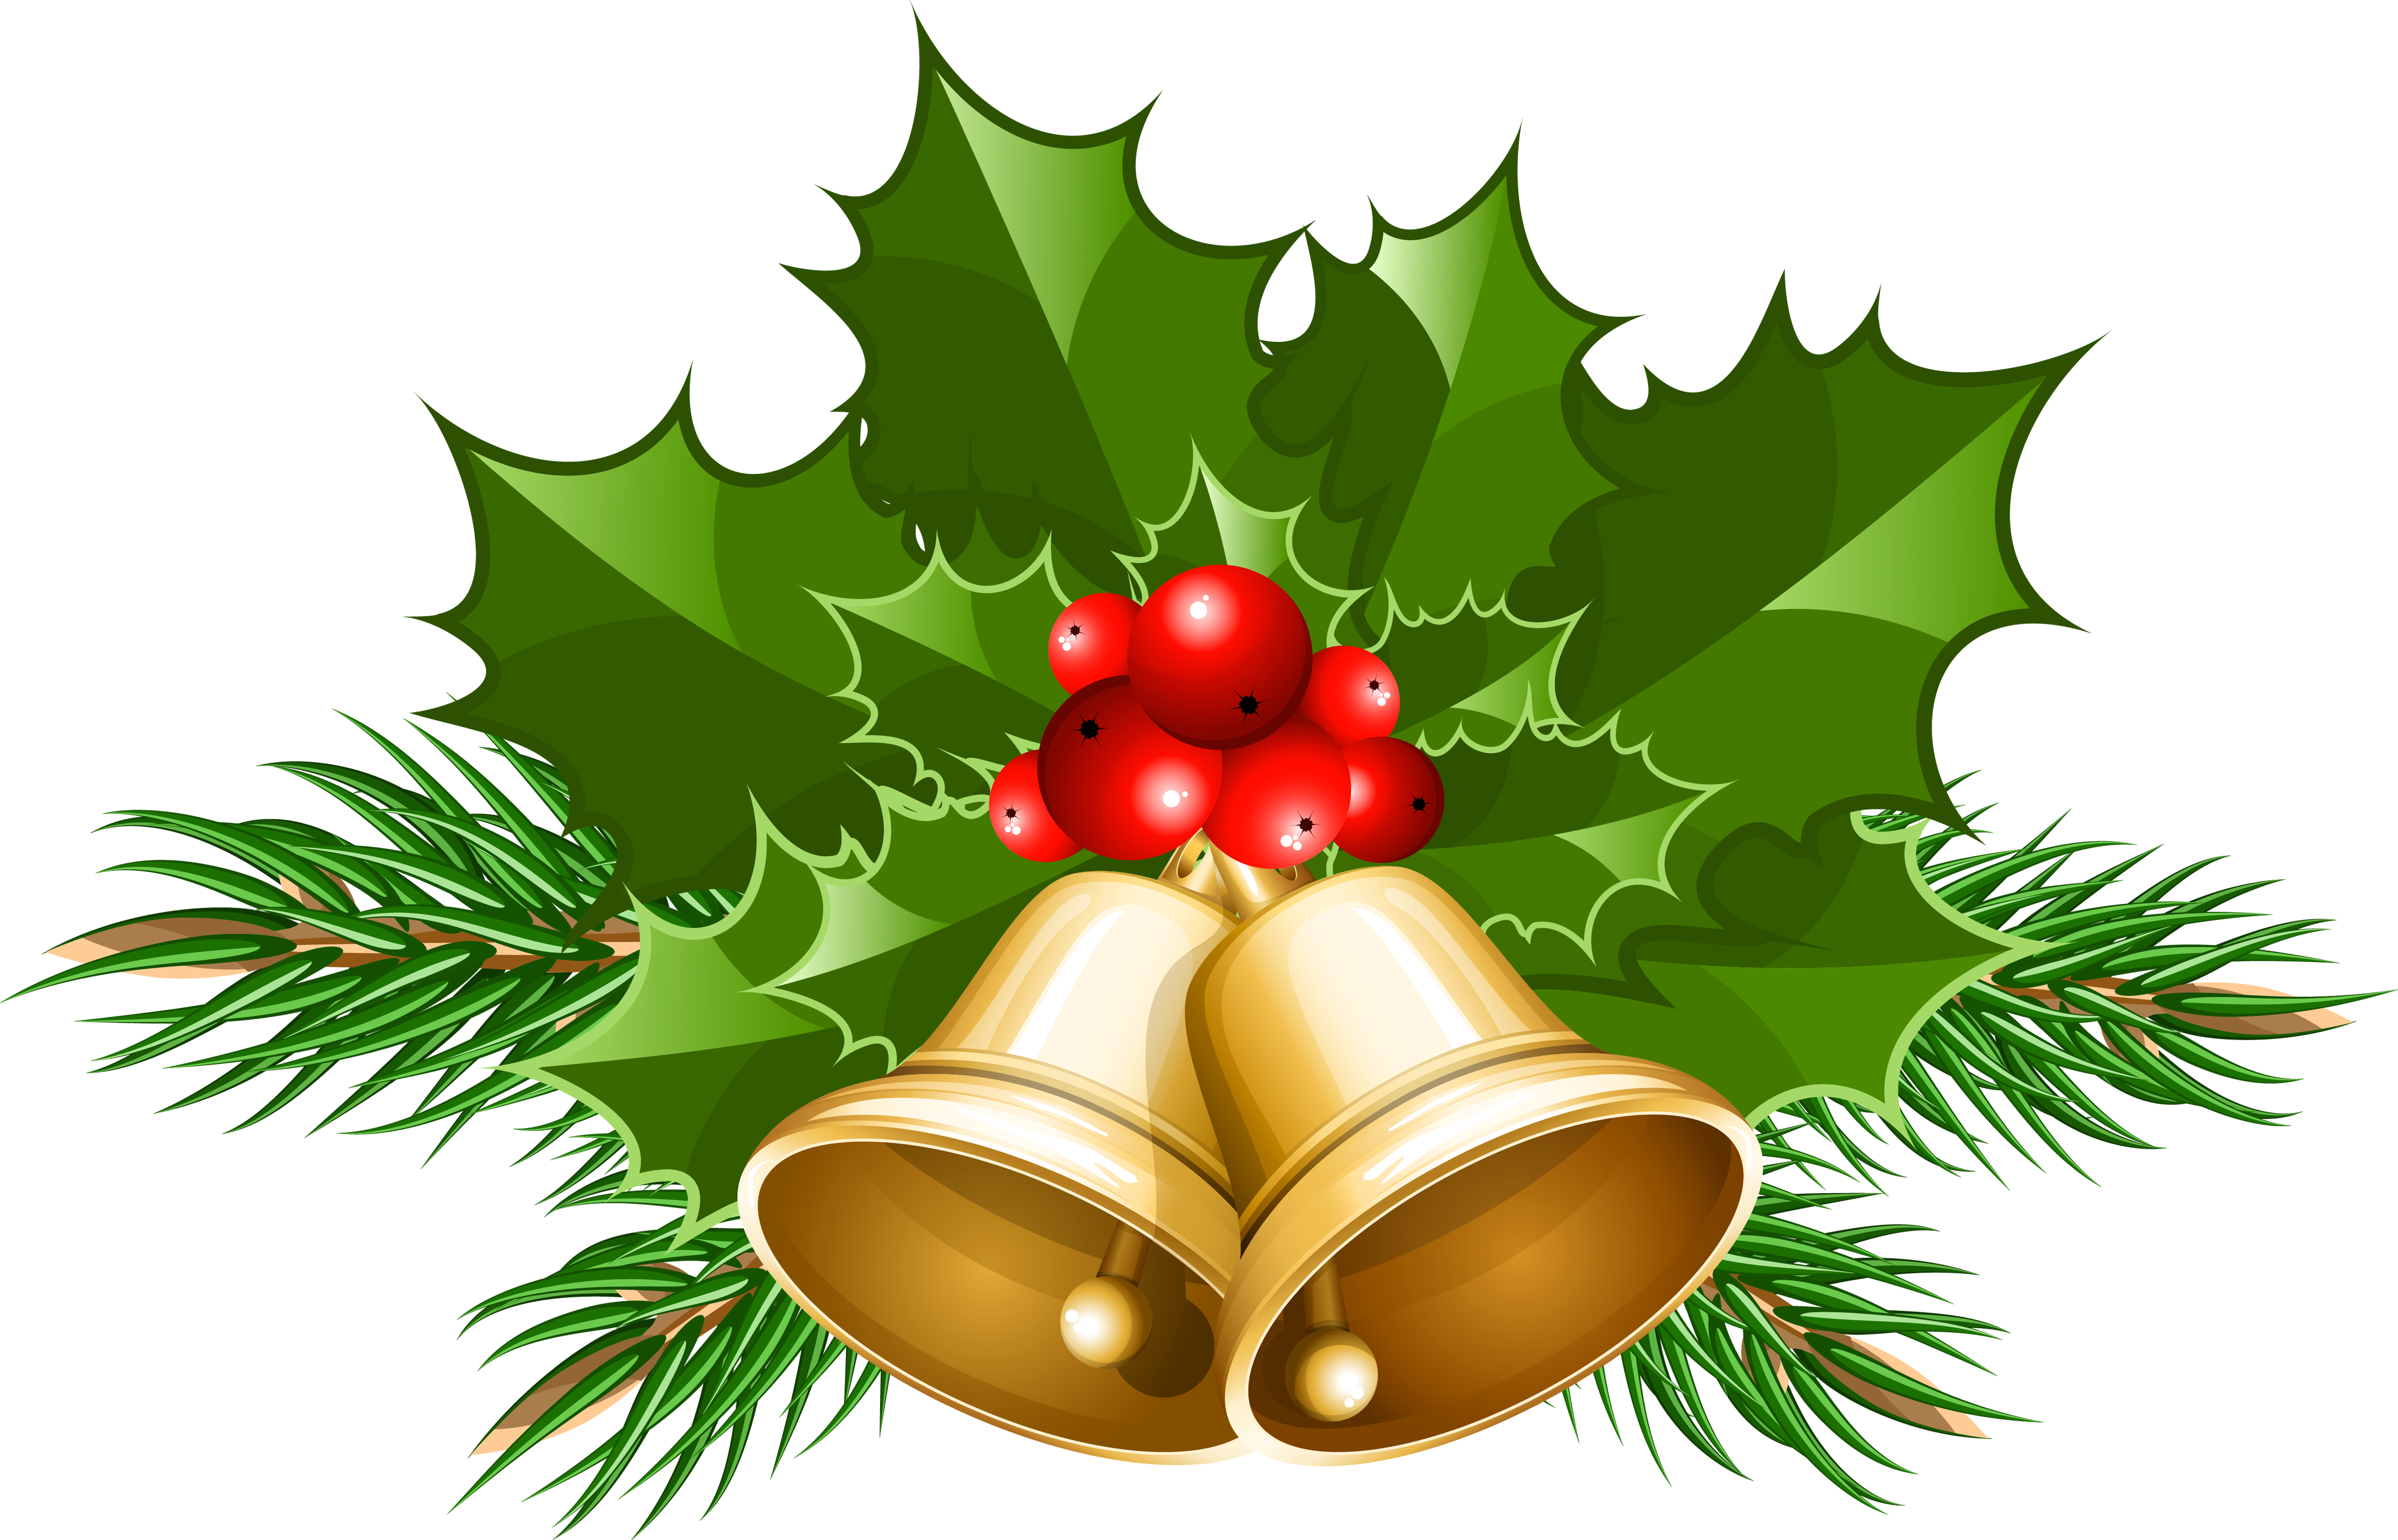  /><br /><br/><p>Christmas Bells</p></center></center>
<div style='clear: both;'></div>
</div>
<div class='post-footer'>
<div class='post-footer-line post-footer-line-1'>
<div style=